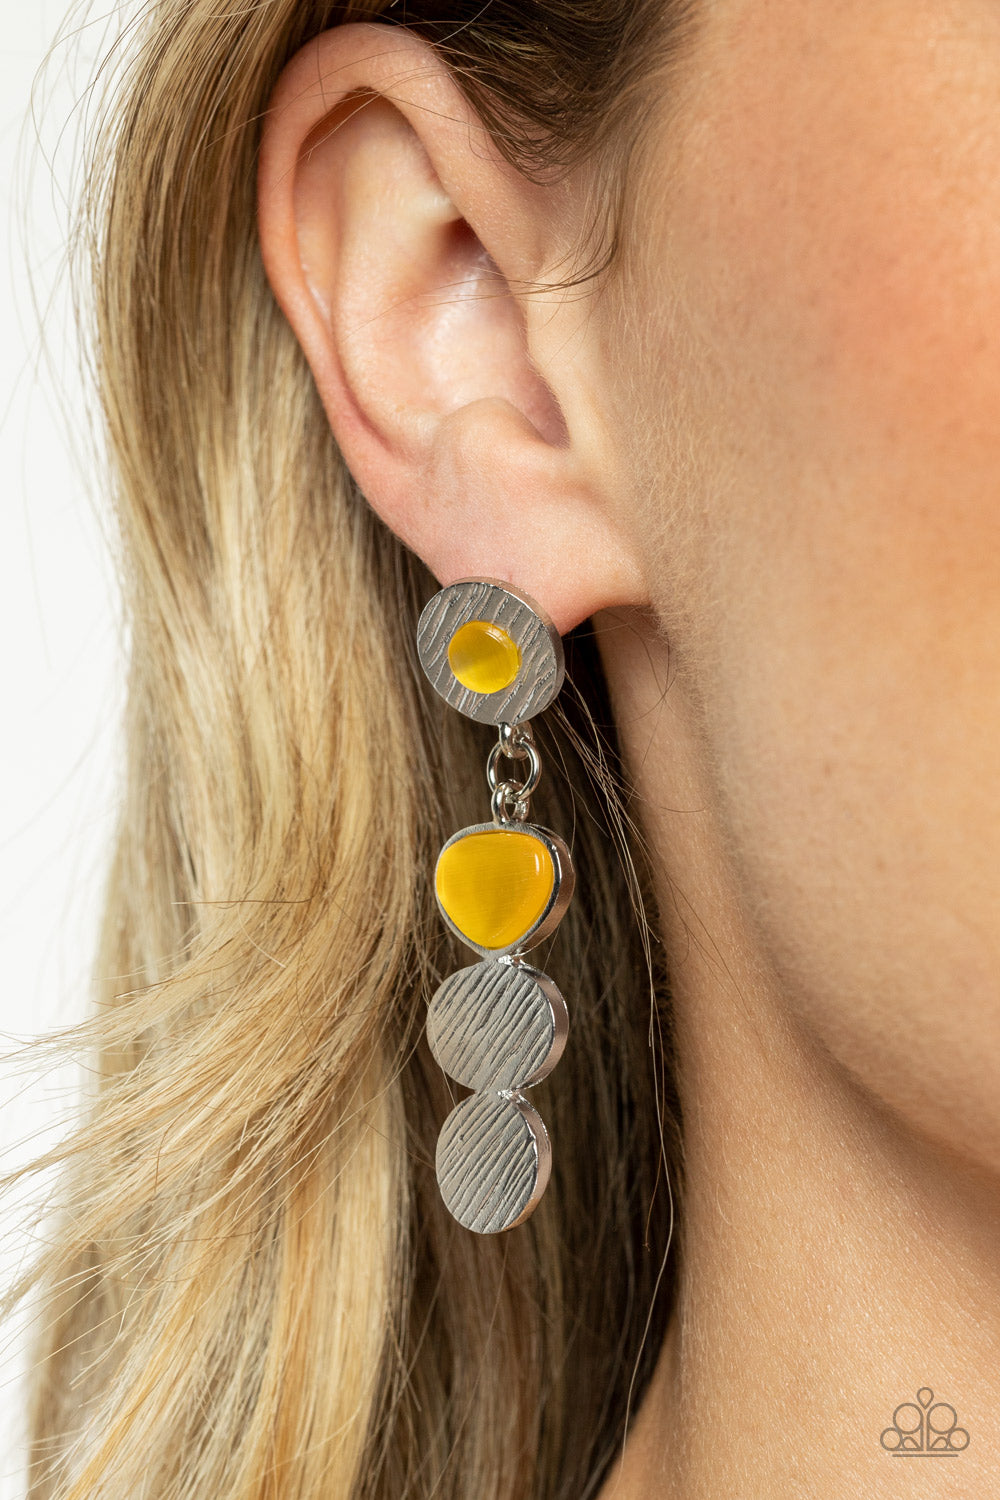 Scratched in shimmery textures, a mismatched collection of round and oval silver frames link and connect into a pair of abstract lures. Flat yellow cat's eye-like accents haphazardly adorn the display, adding asymmetrical allure to the whimsical pair. Earring attaches to a standard post fitting.  Sold as one pair of post earrings.